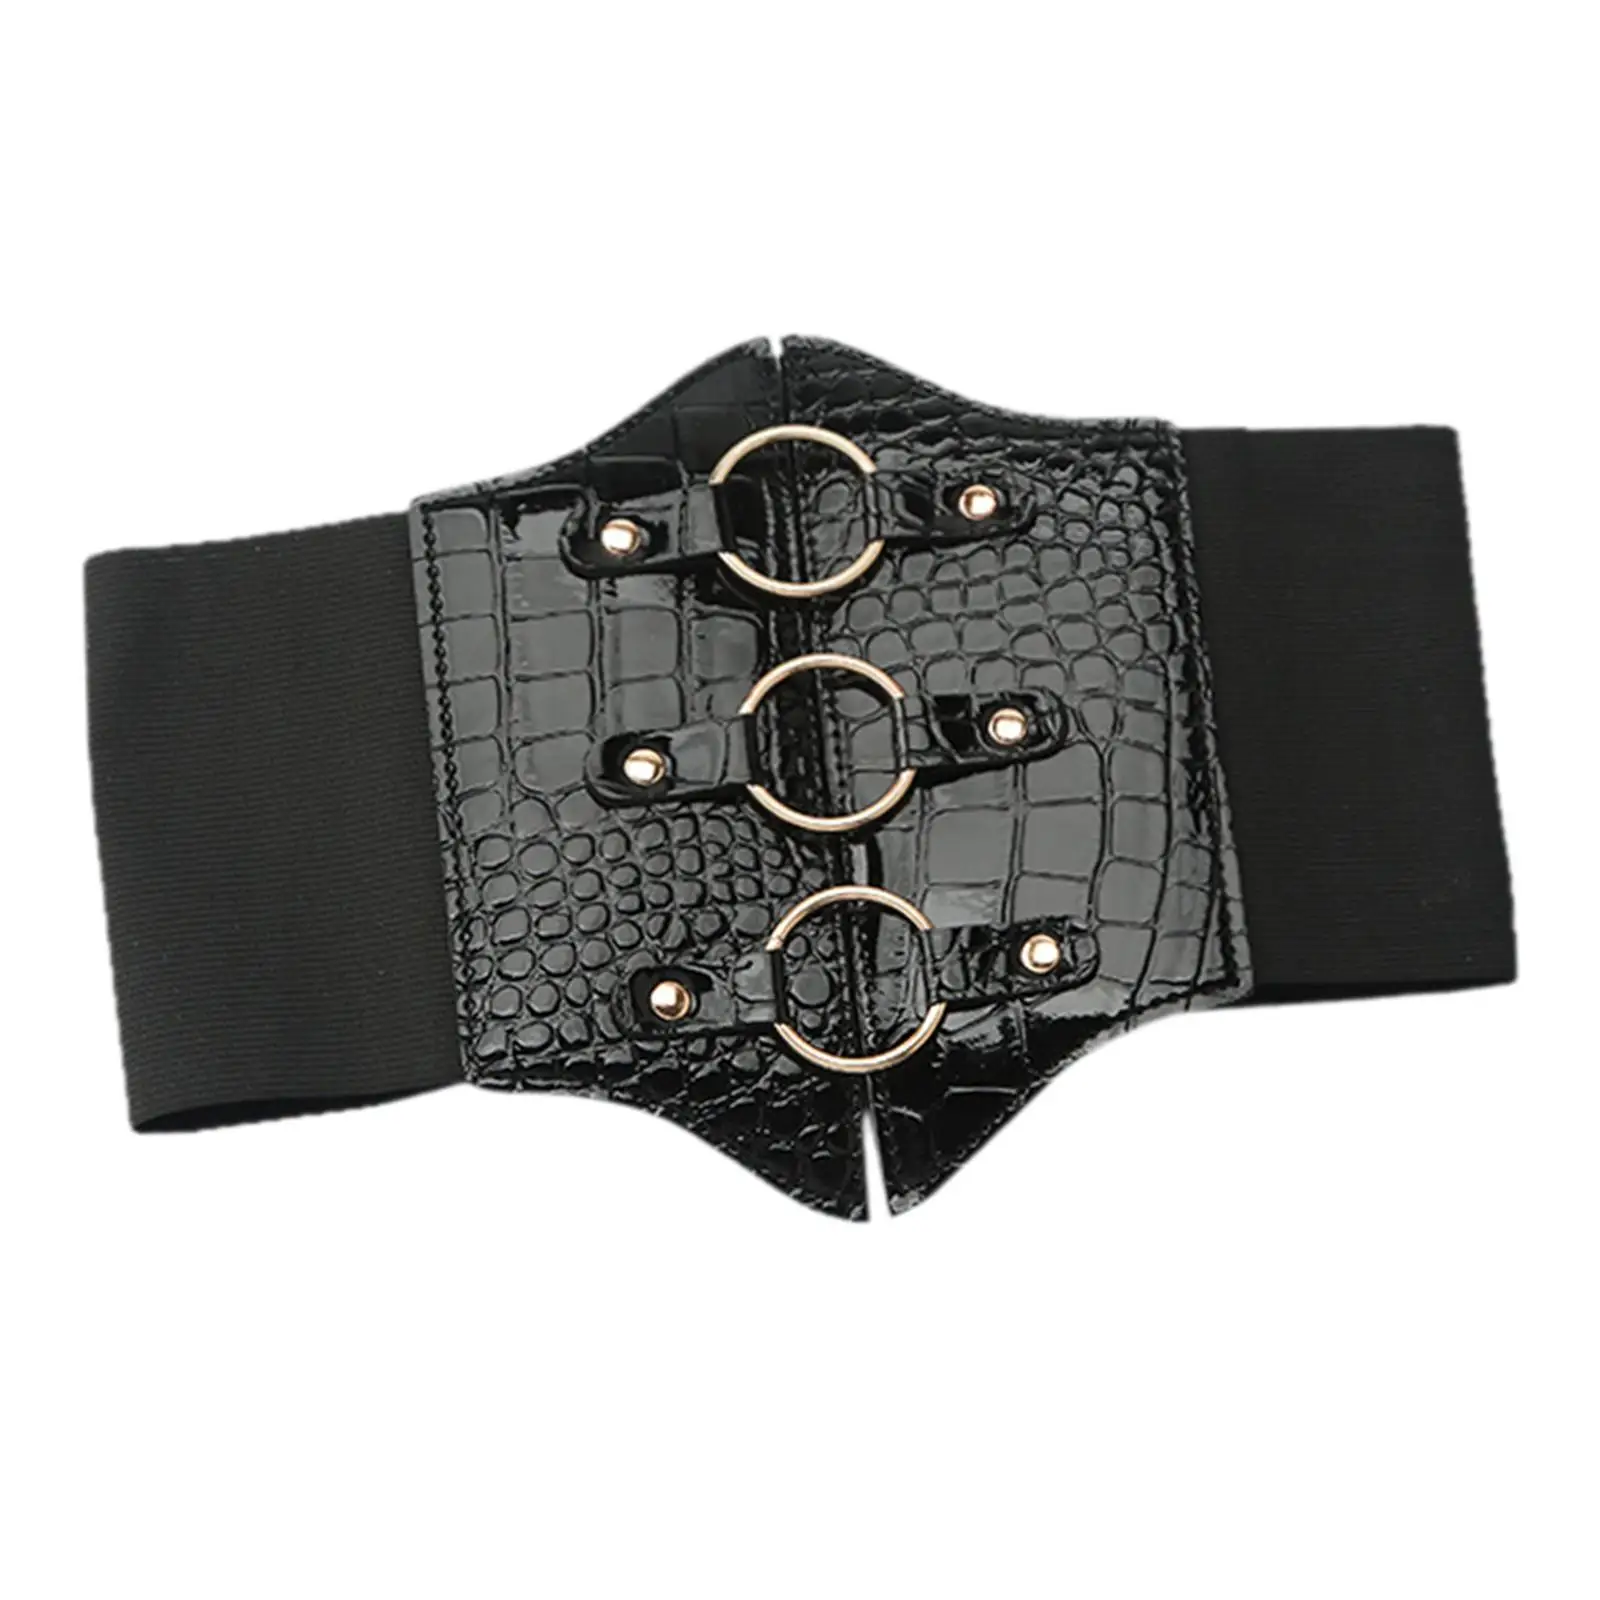 Retro Style Women Charm Waistband Wide High Waist Body Link Belts Ladies Coat Cincher Jewelry Belt for Dresses Party Cosplay